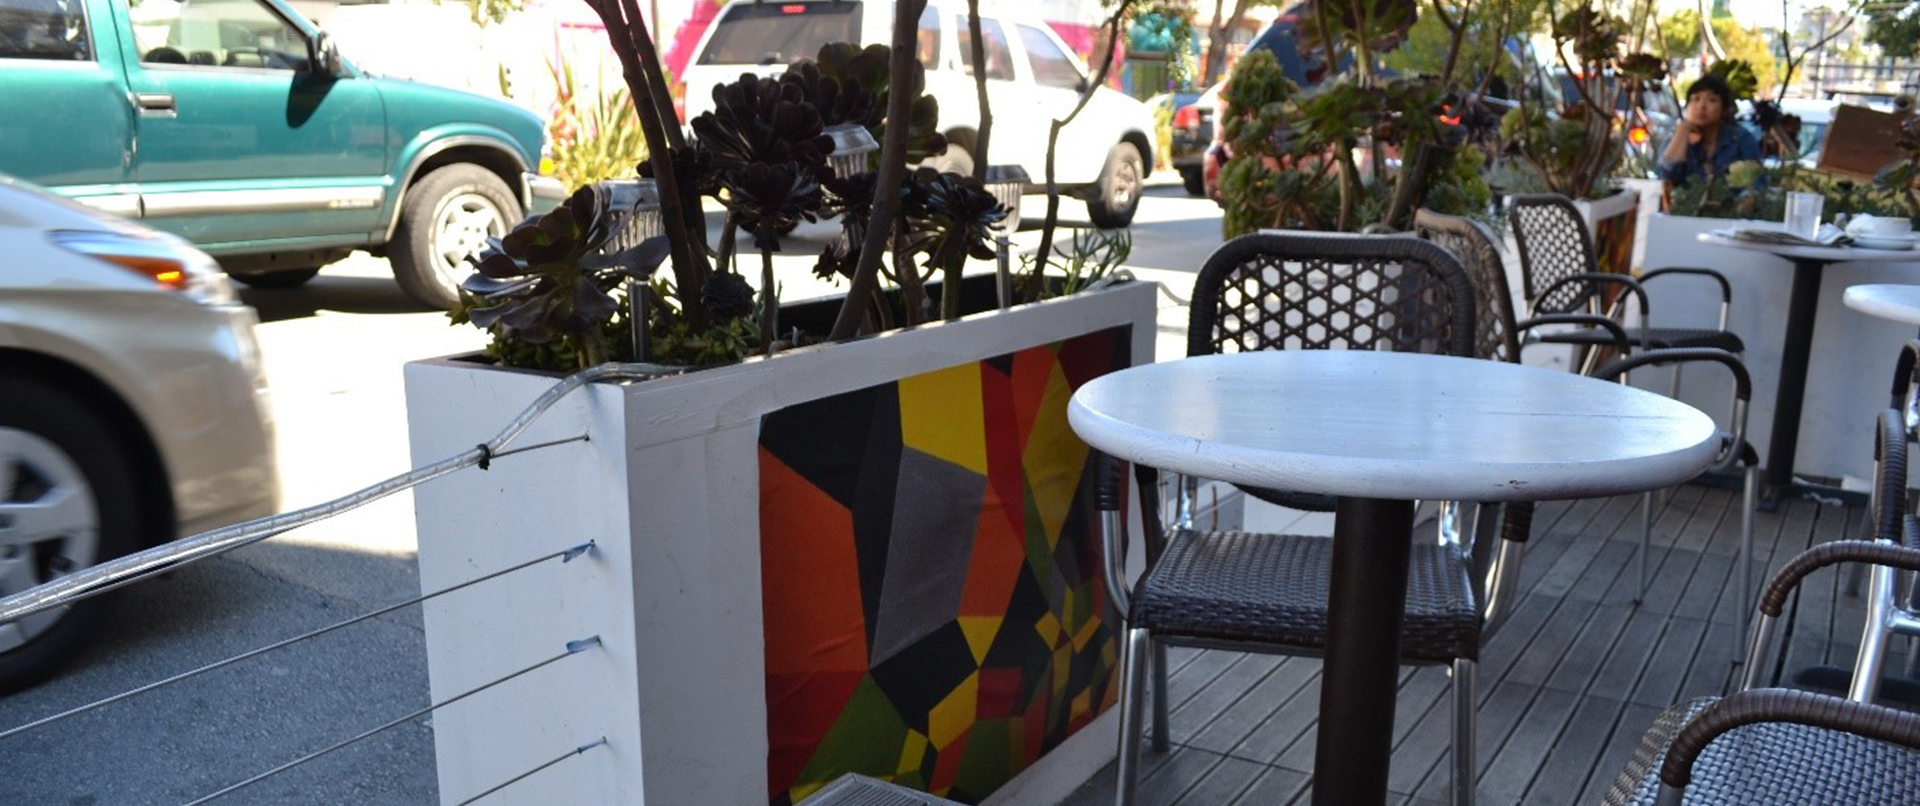 Pop-Up Park Outdoor Seating Area